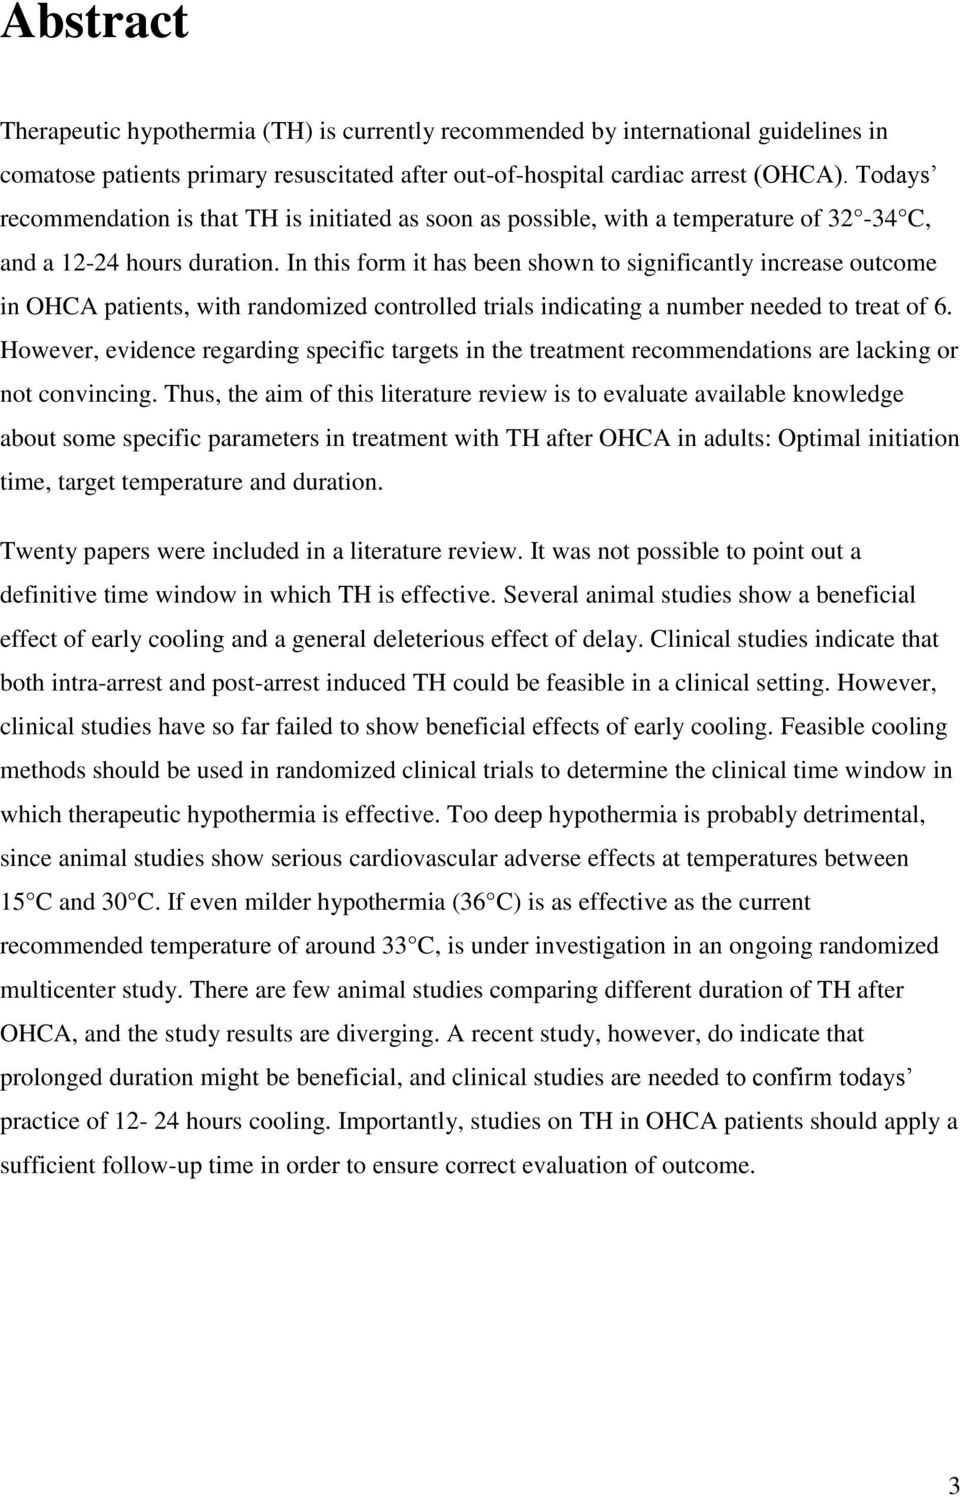 In this form it has been shown to significantly increase outcome in OHCA patients, with randomized controlled trials indicating a number needed to treat of 6.